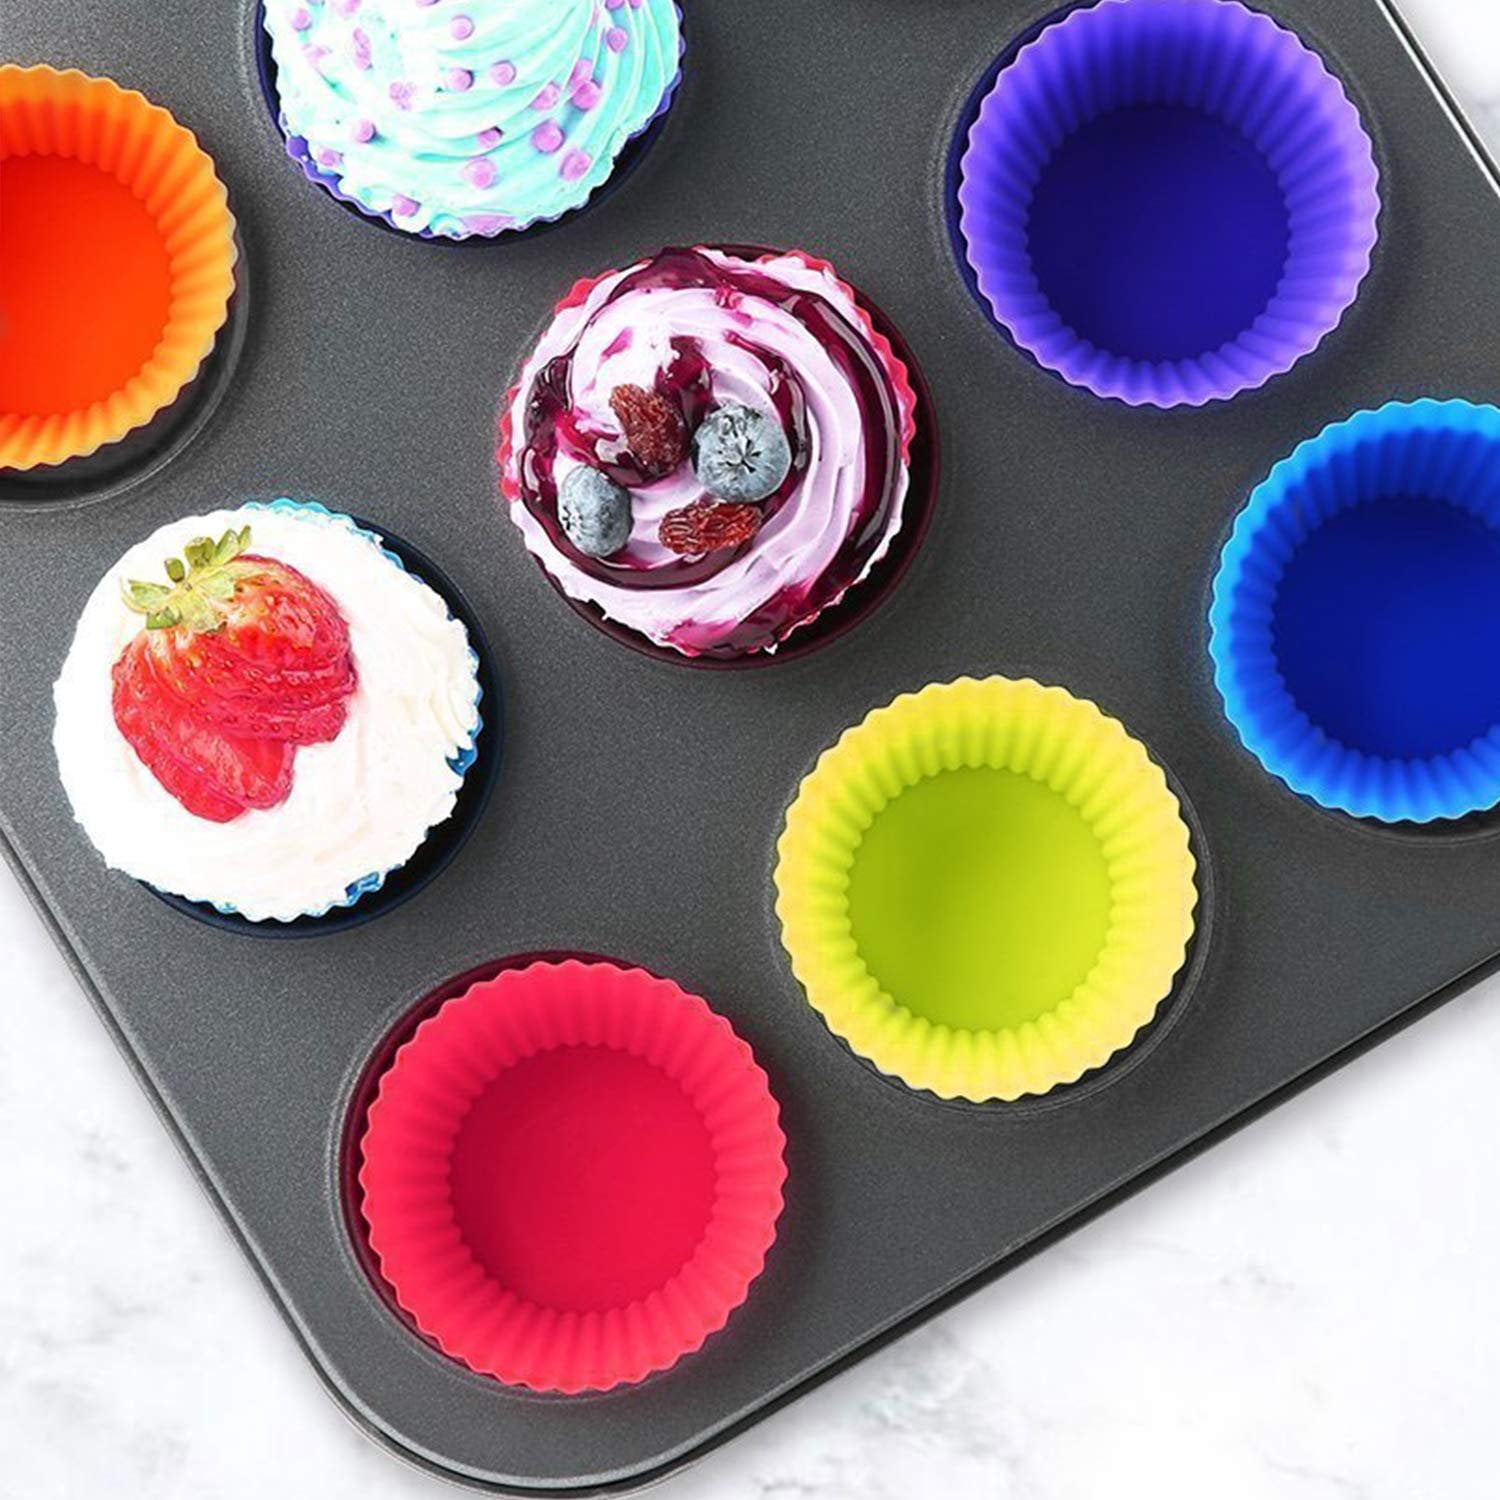 Pantry Elements Silicone Cupcake Liners for Baking and Bonus Gift Jar, Pack  of 12 Reusable Muffin Liners Baking Cups Molds for Baking, Bento Lunch Box  Accessori…